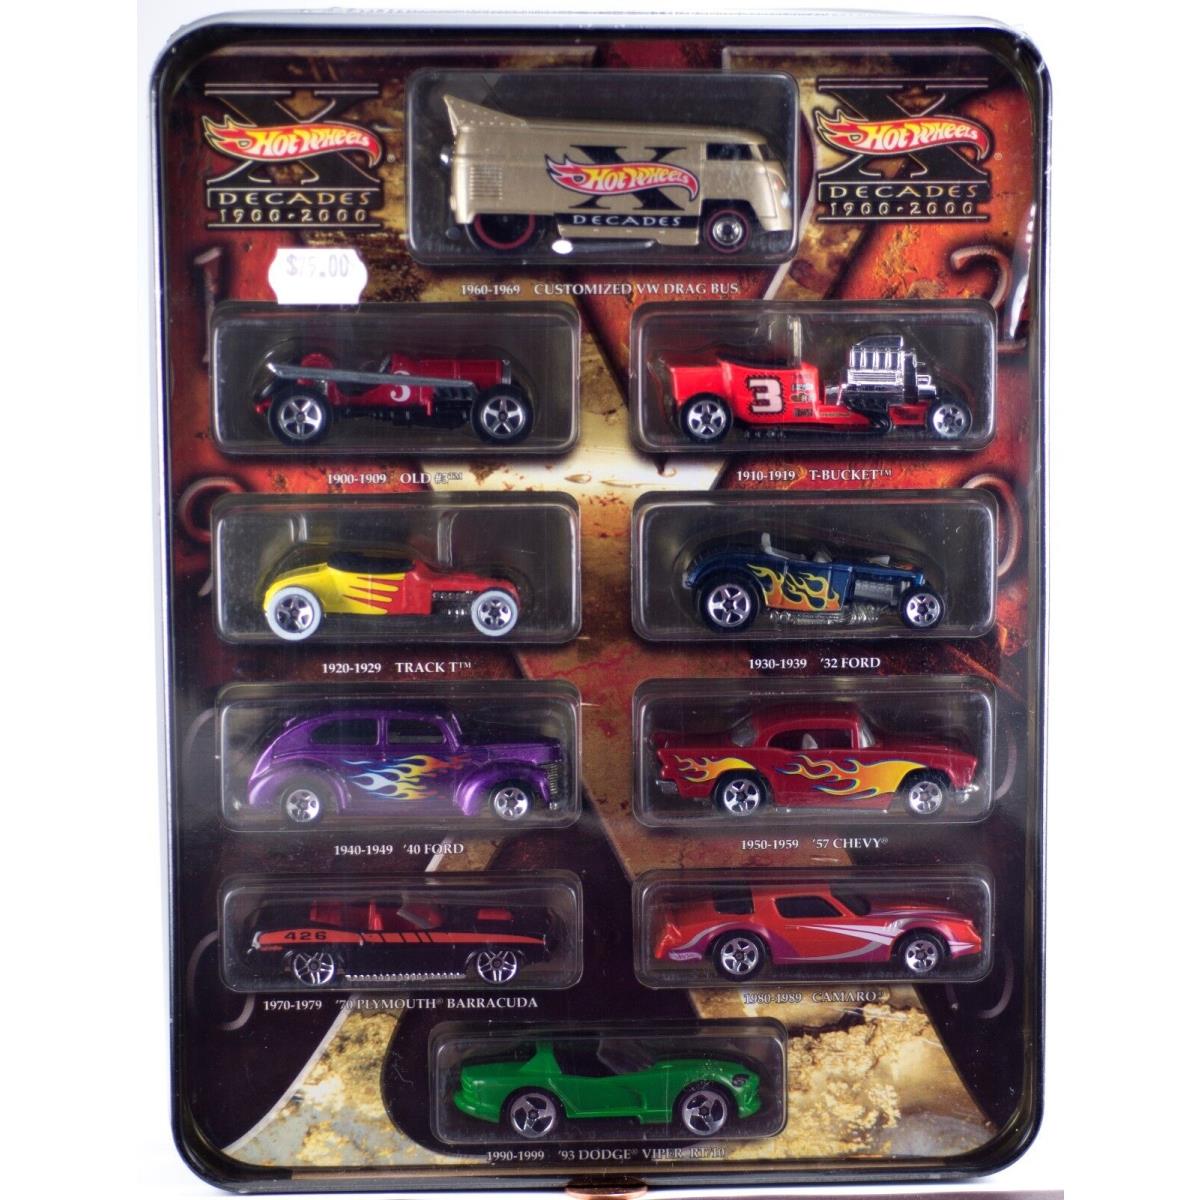 Hot Wheels Target Exclusive Decades 1900-2000 Set of 10 Cars VW Drag Bus